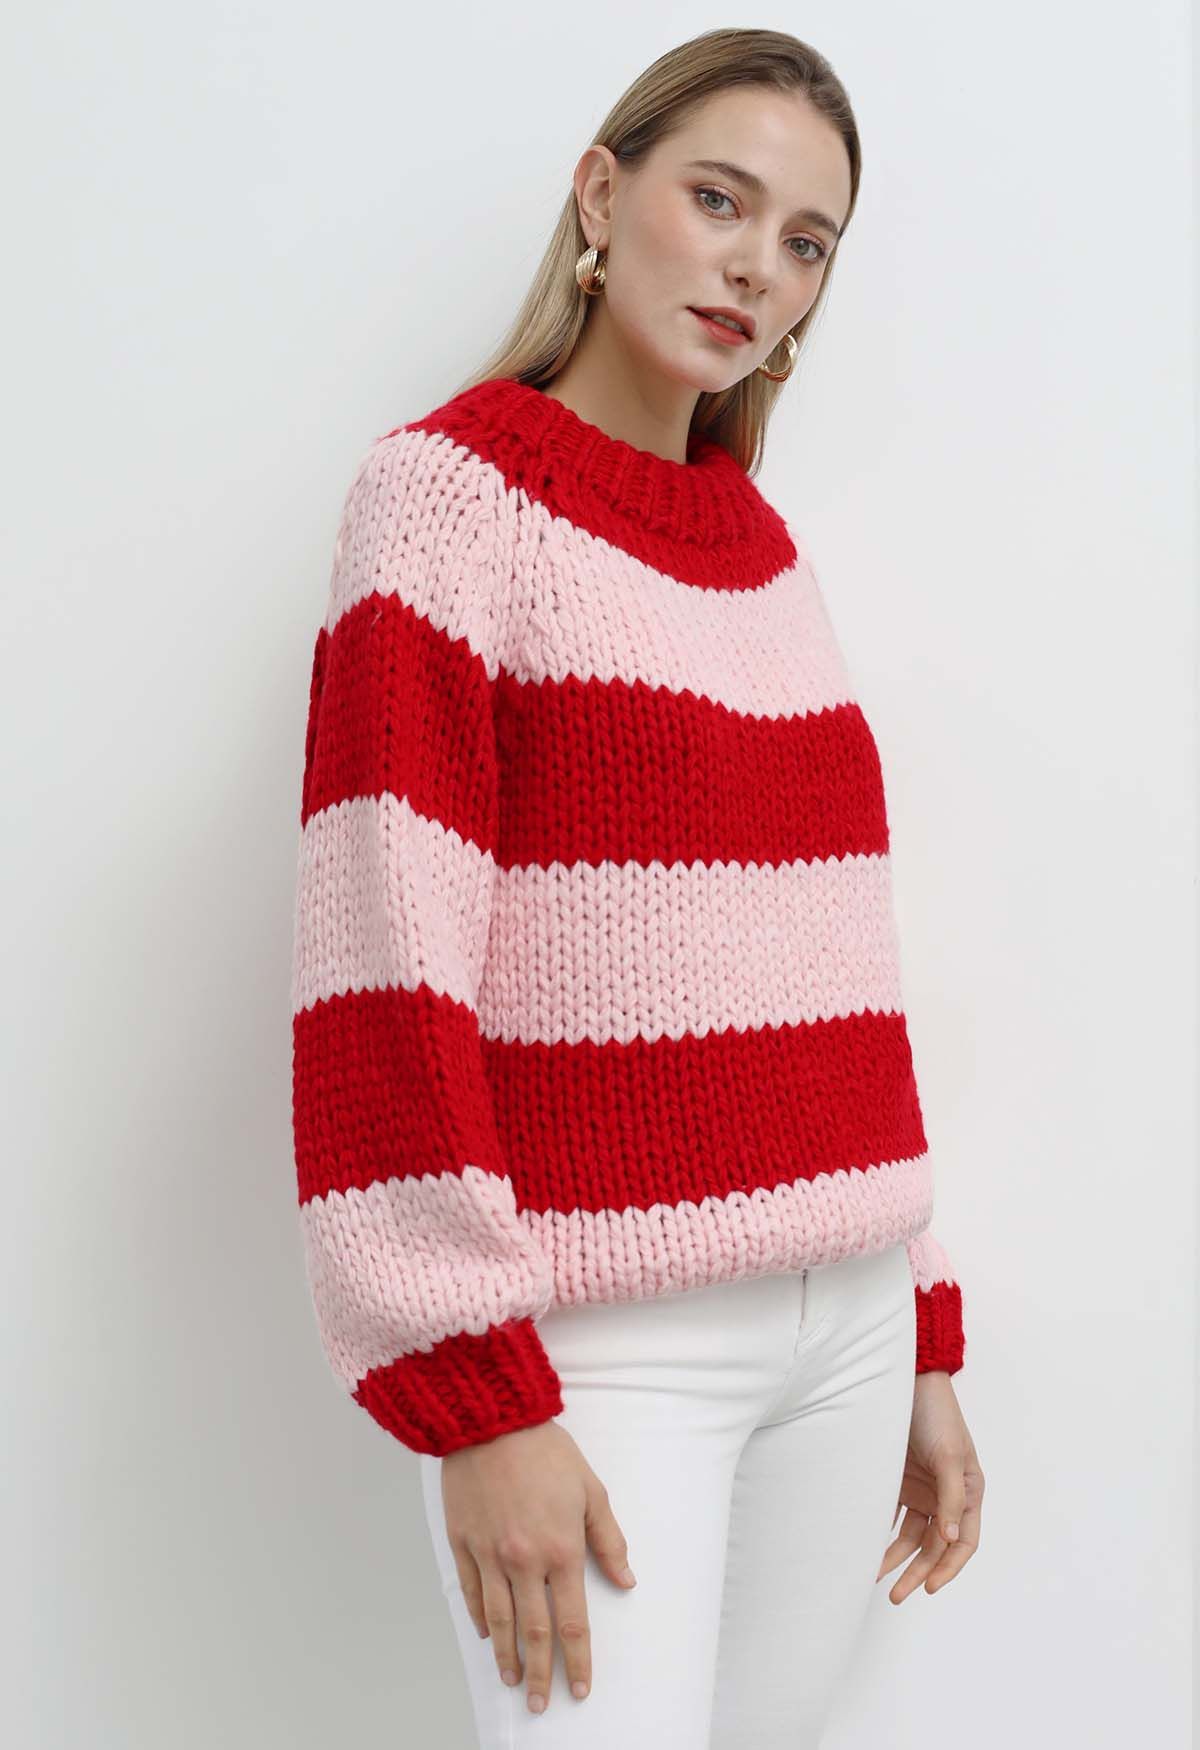 Festive Striped Chunky Hand Knit Sweater - Retro, Indie and Unique Fashion